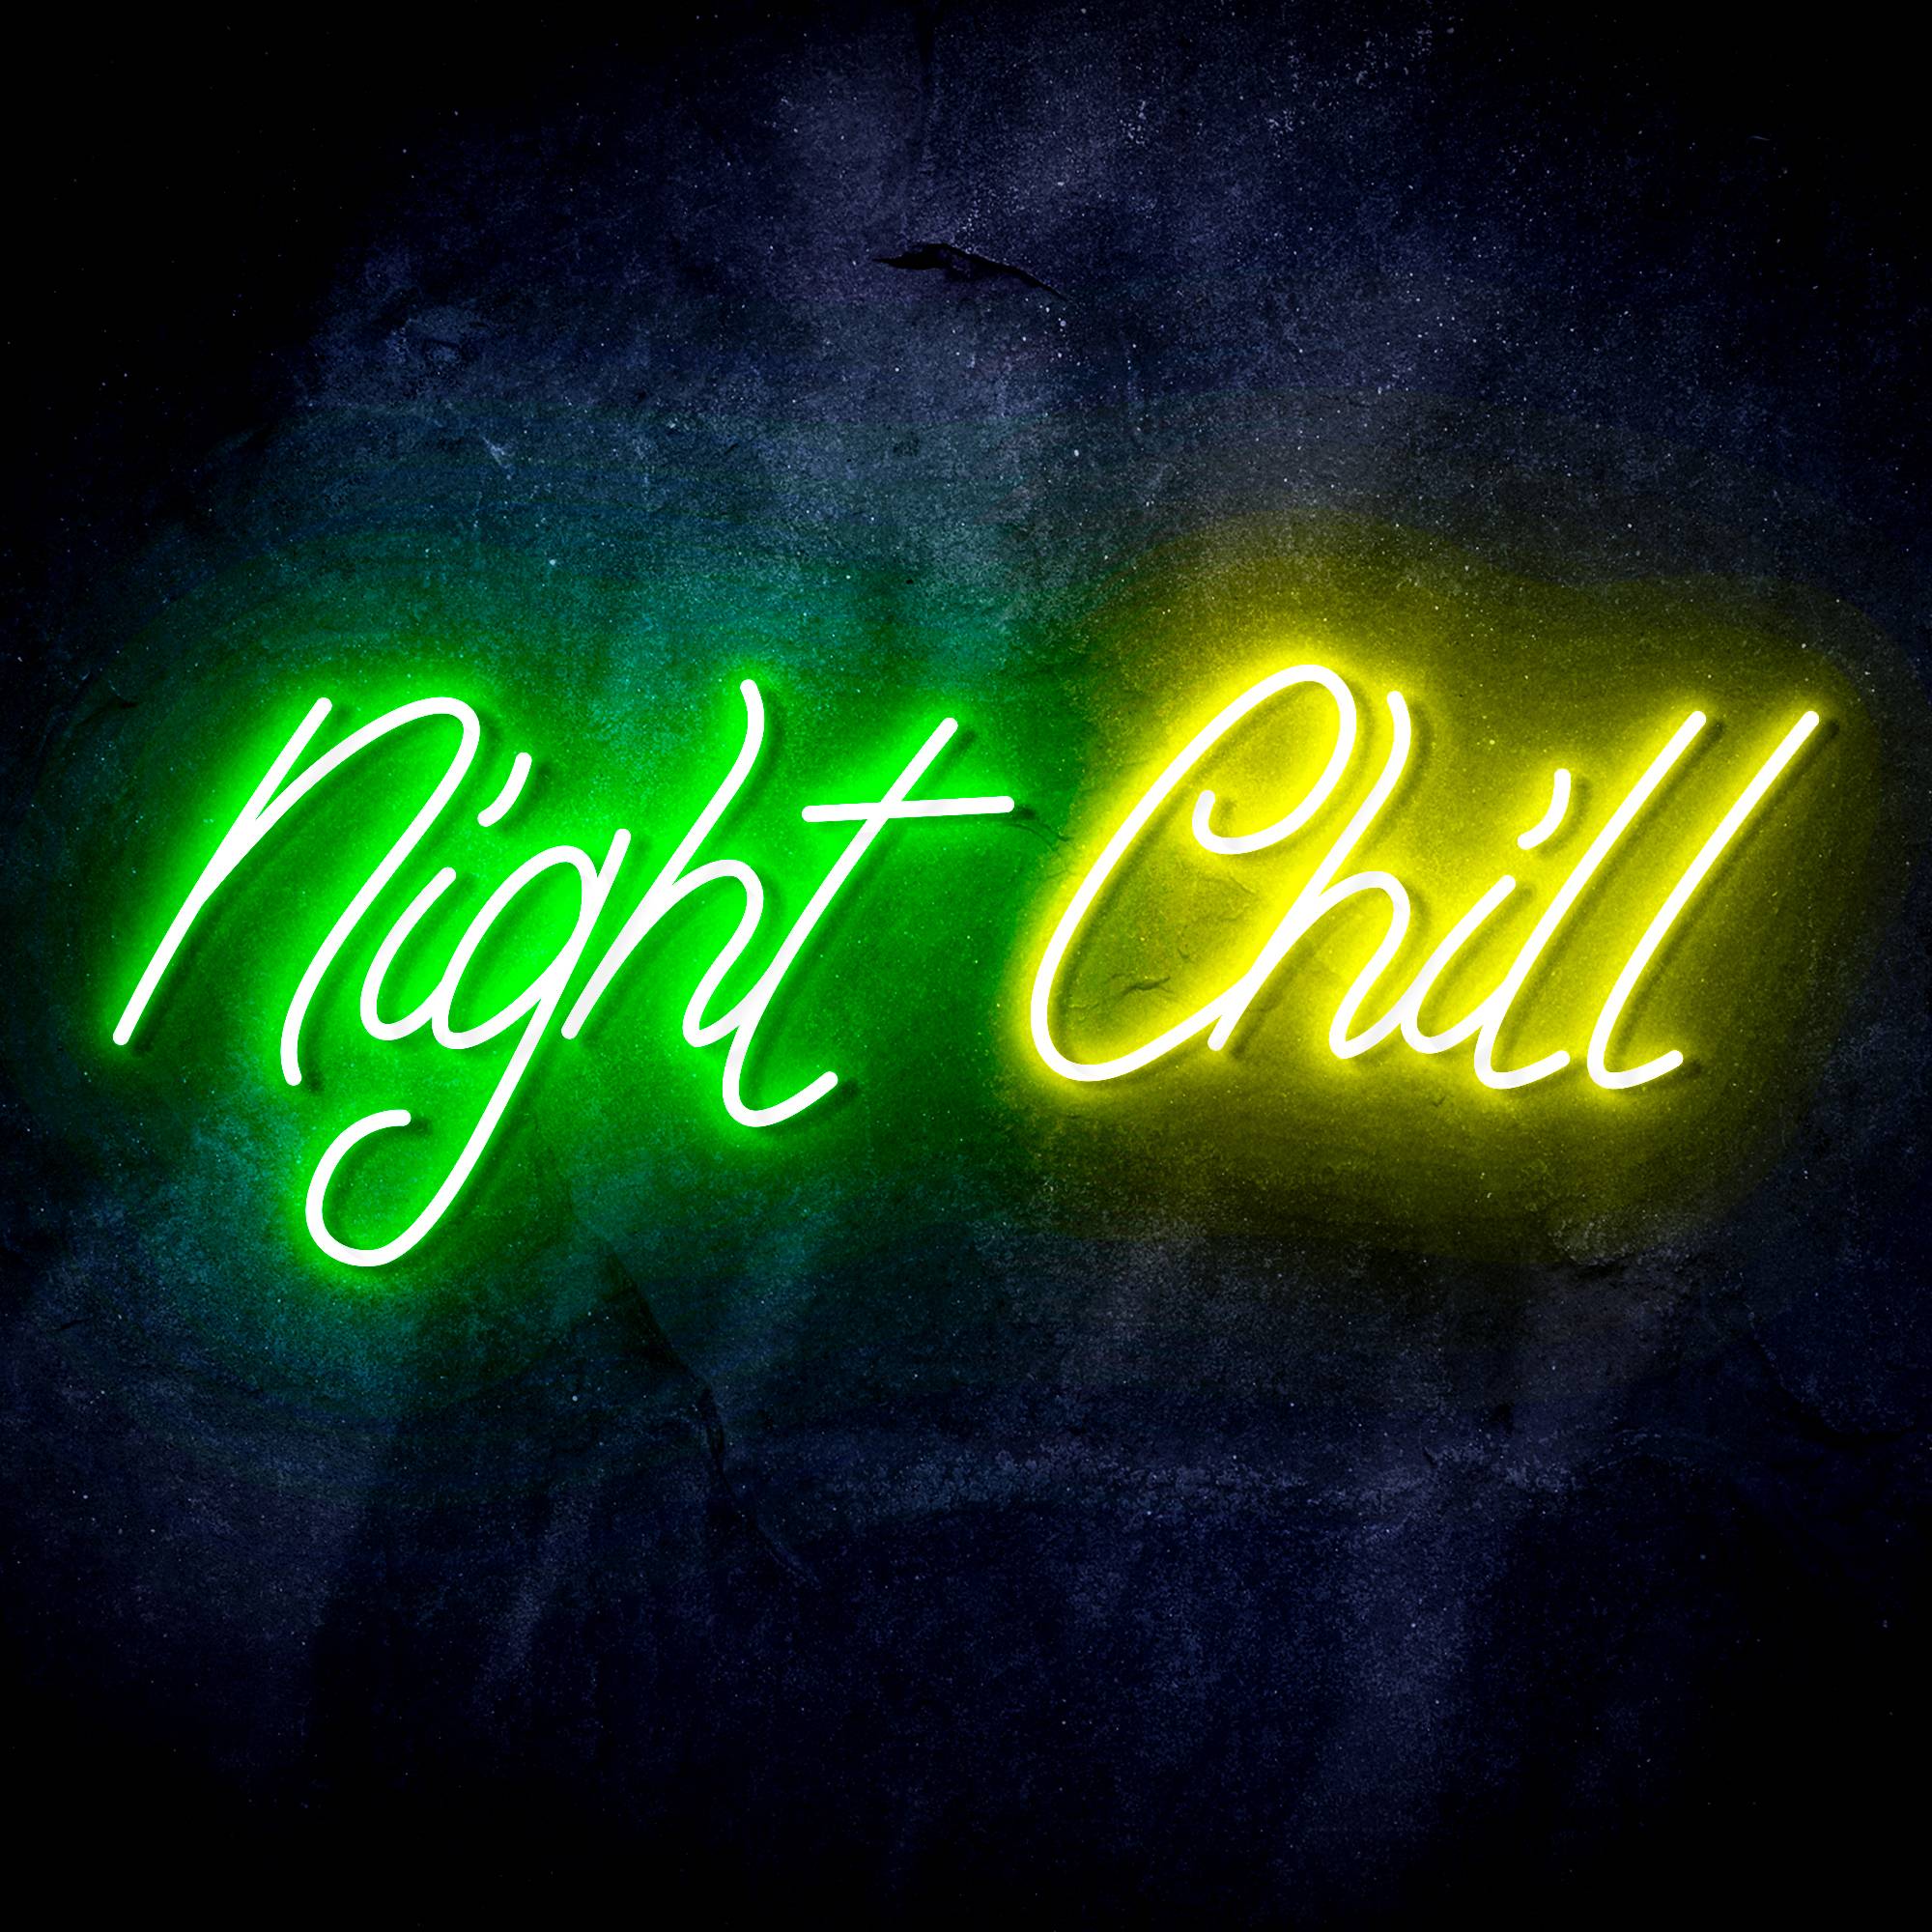 "Night Chill" Text Quote LED Neon Sign